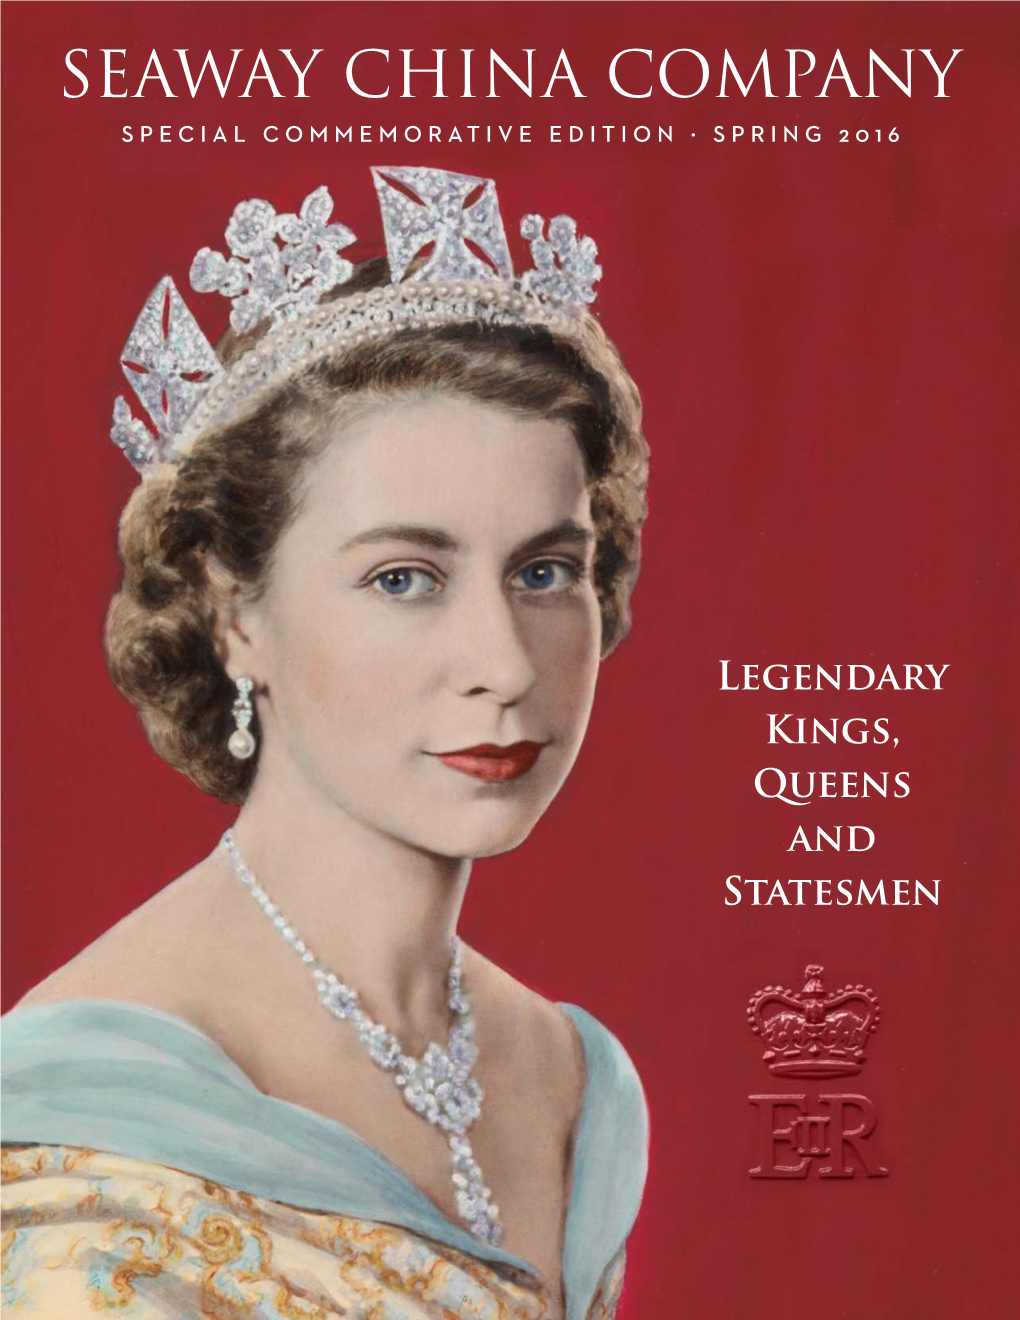 Legendary Kings, Queens and Statesmen